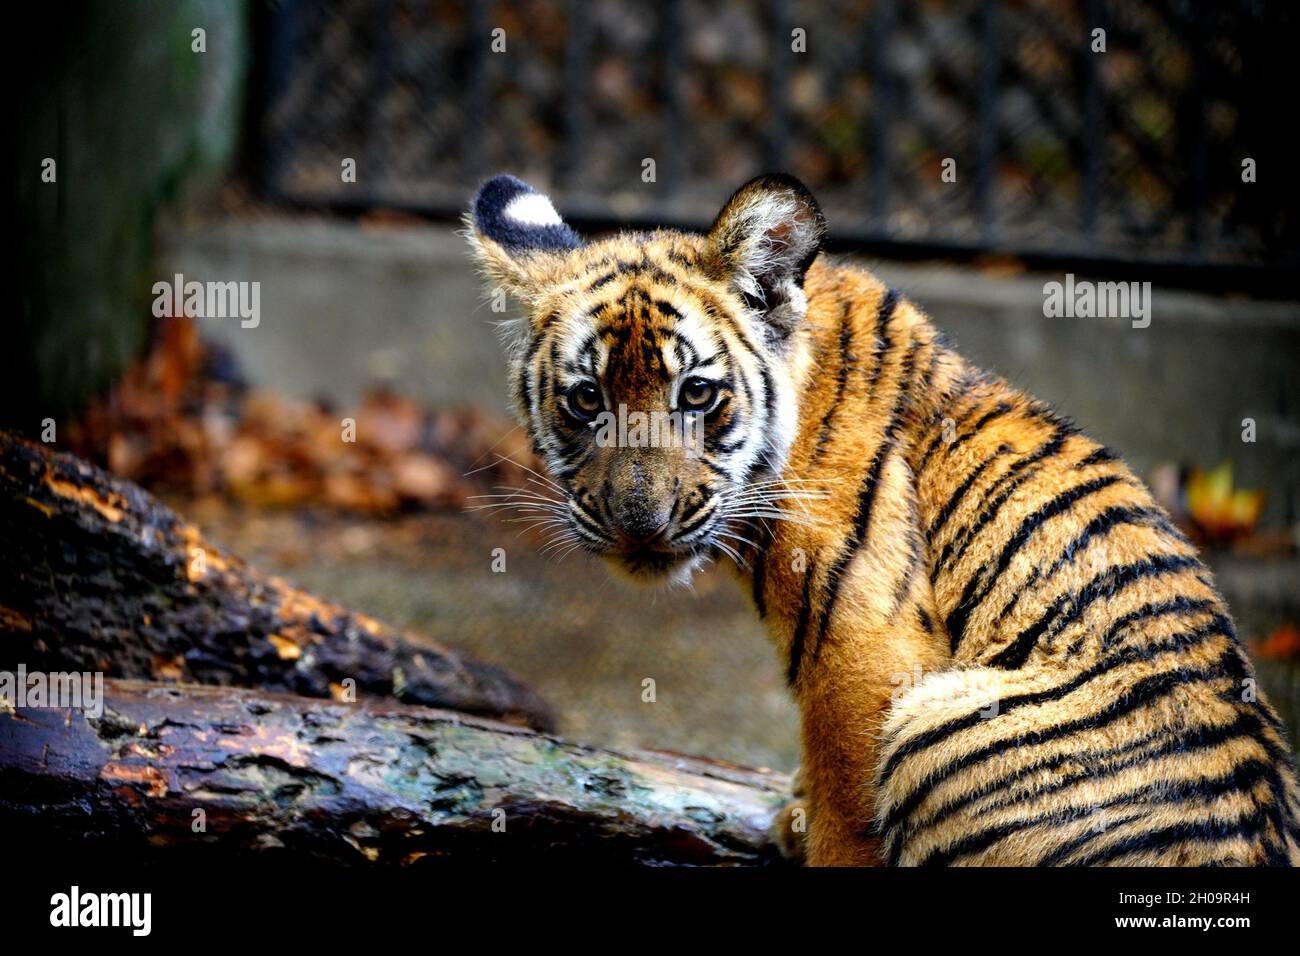 Shanghai. 11th Oct, 2021. Photo taken on Oct. 11, 2021 shows a South China tiger at the Shanghai Zoo in east China's Shanghai. The South China tiger is a rare kind endemic to China and is on the national first-class protection list. Currently, a total of 28 South China tigers are living in the Shanghai Zoo. The zoo has recorded each tiger's information and established a gene bank for research, and tigers are treated and bred in a scientific way. Credit: Zhang Jiansong/Xinhua/Alamy Live News Stock Photo